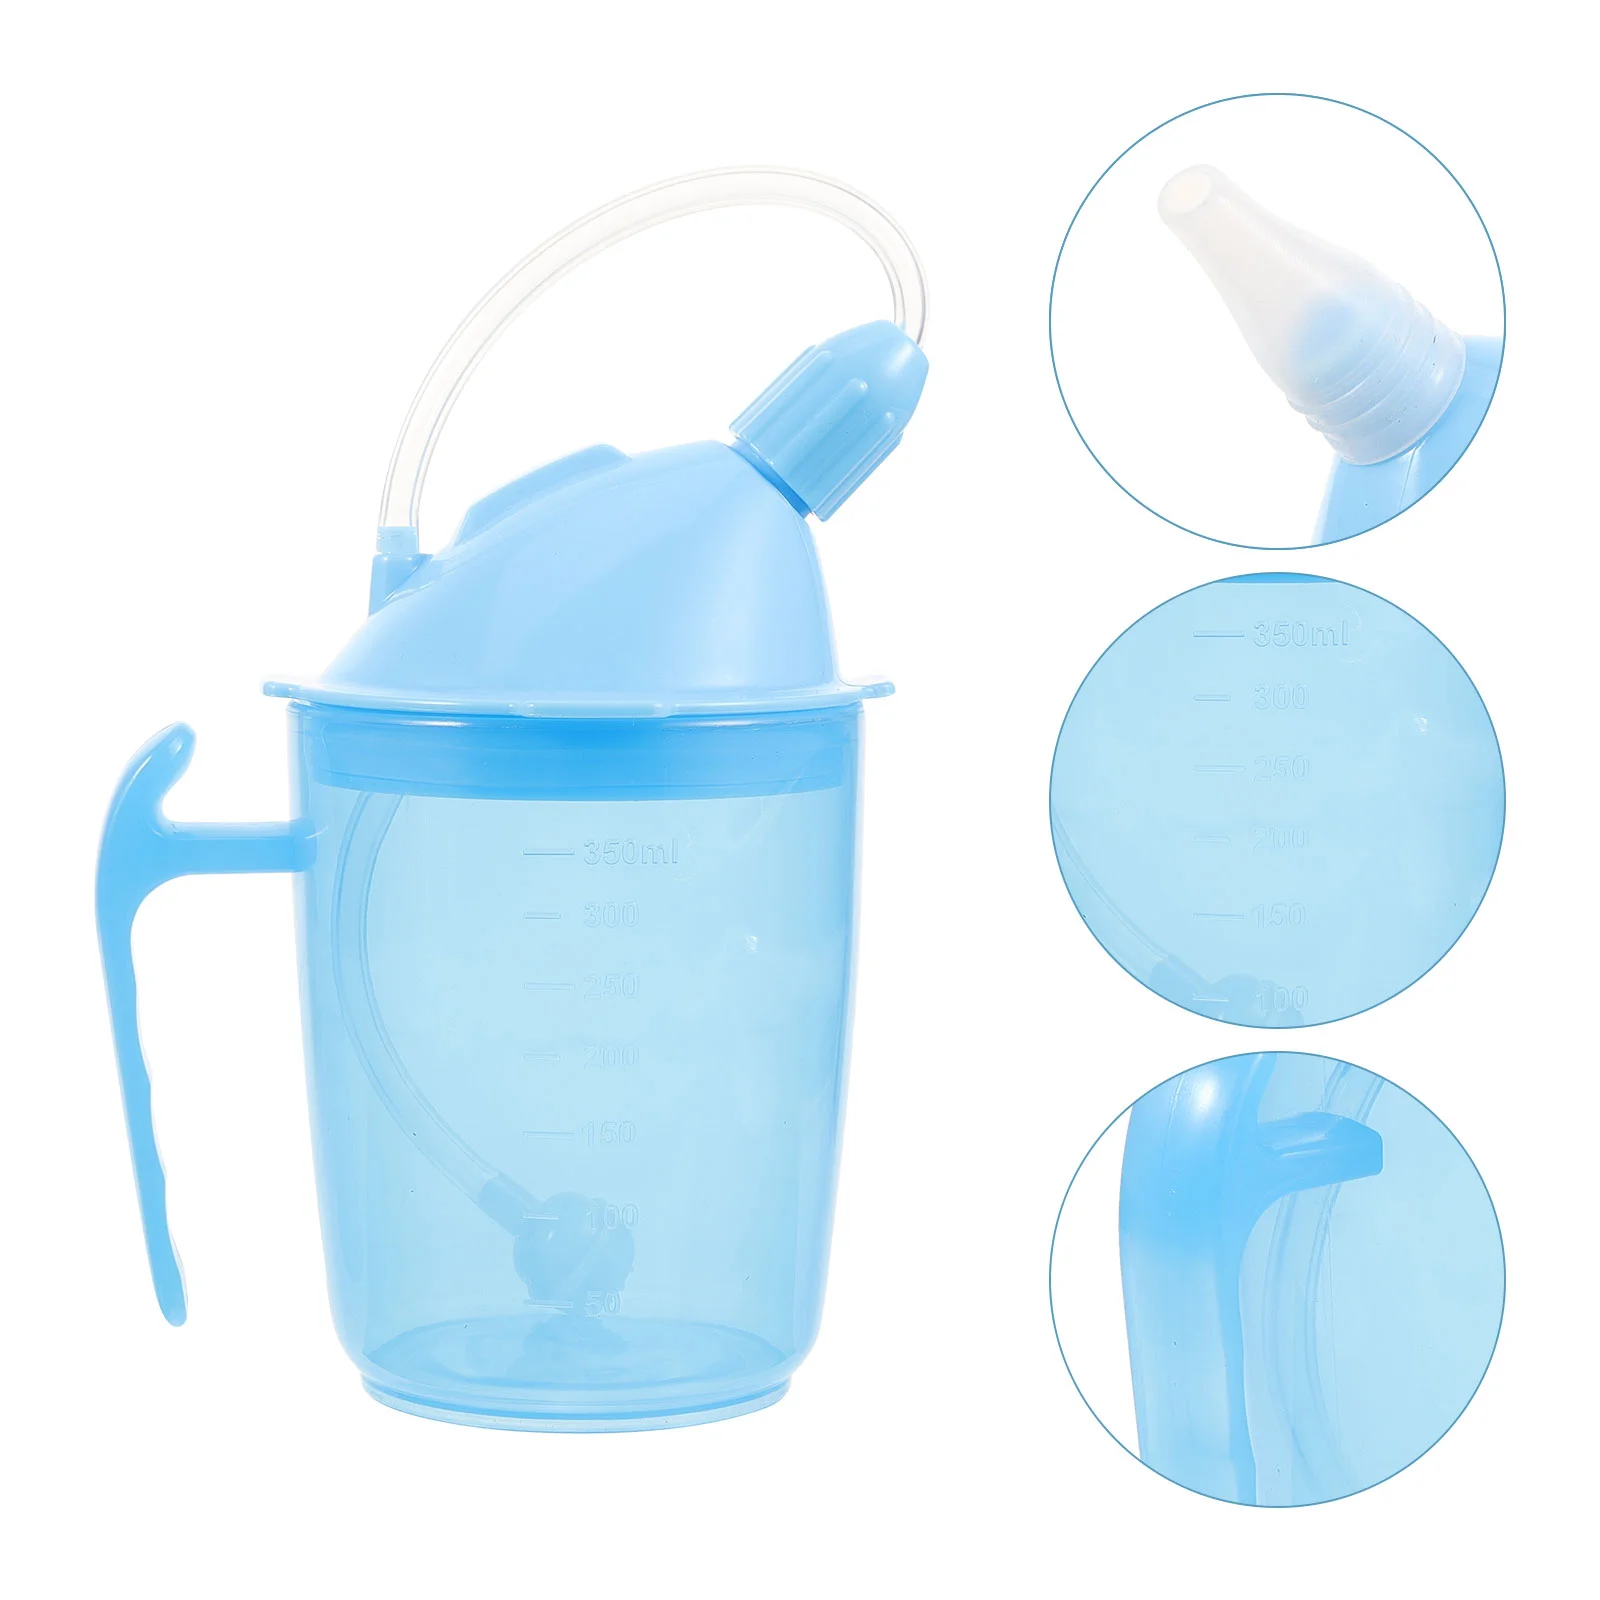 No Spill Cups For Elderly Convalescent Feeding Cup For Elderly & Patients  Drinking Cup With Straw Lid For Seniors Disabled - AliExpress